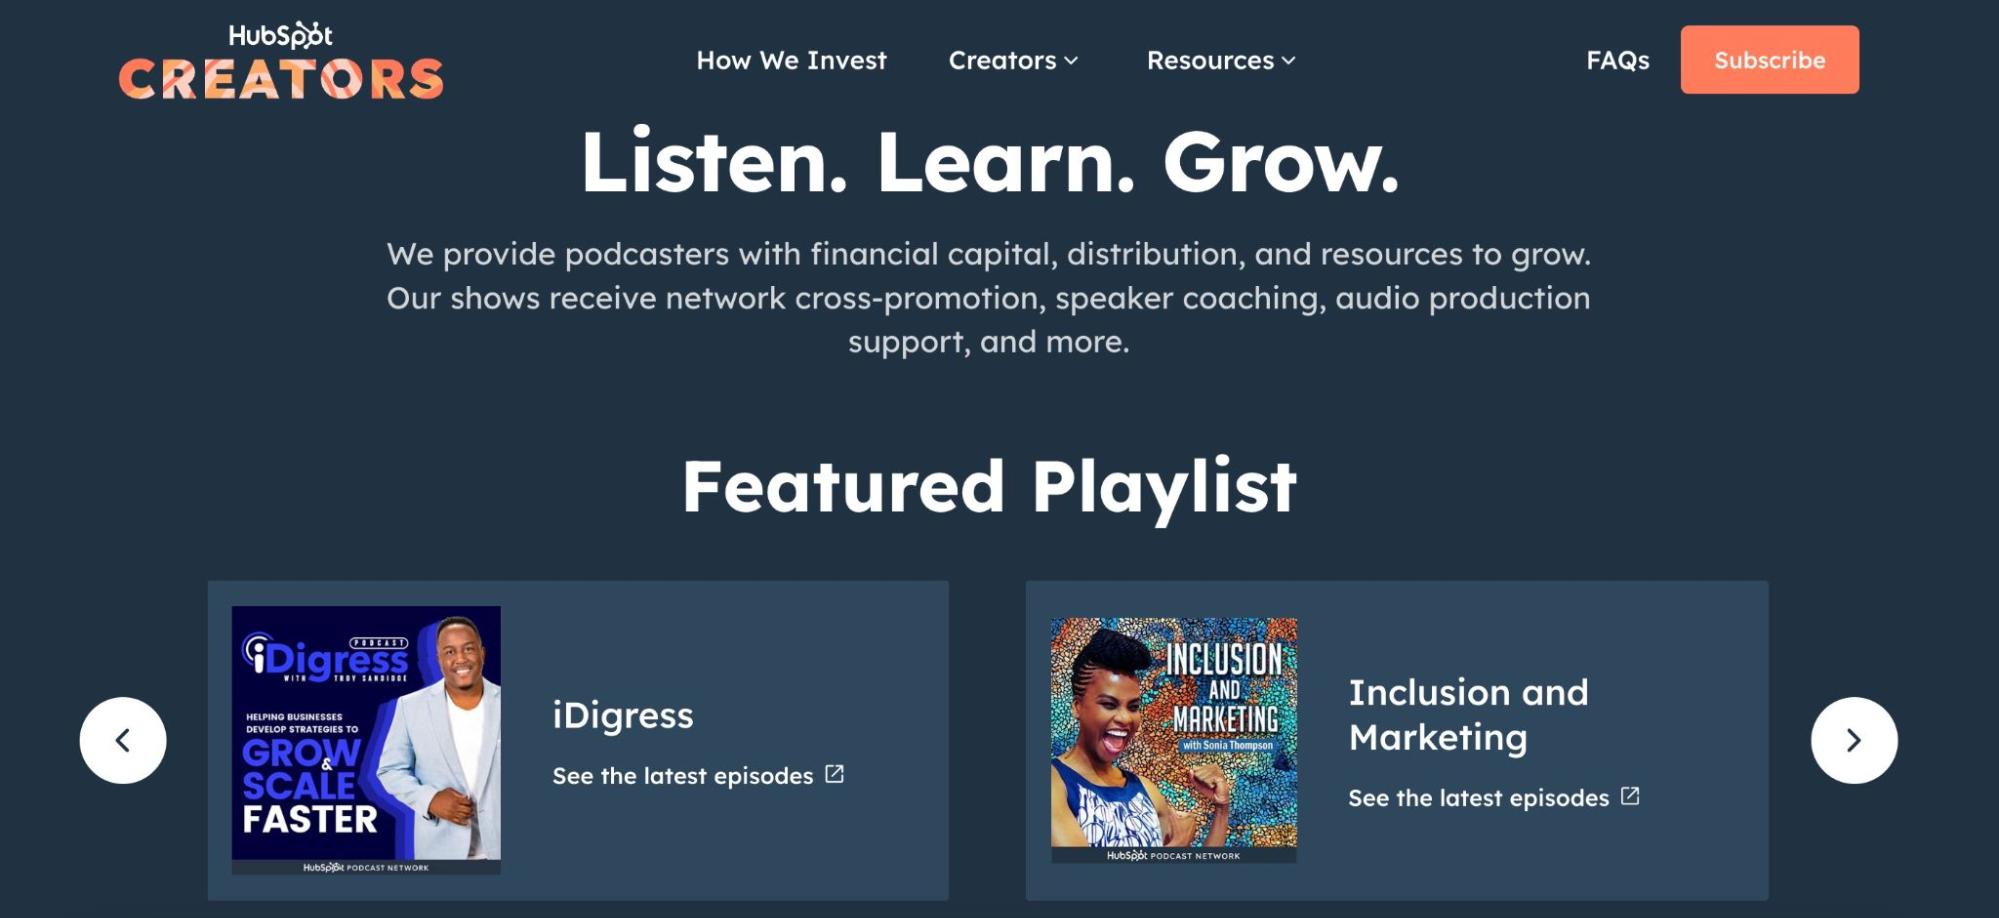 HubSpot Creators Podcast homepage with text: "Listen. Learn. Grow." and featuring "IDigress" and "Inclusion and Marketing" podcasts